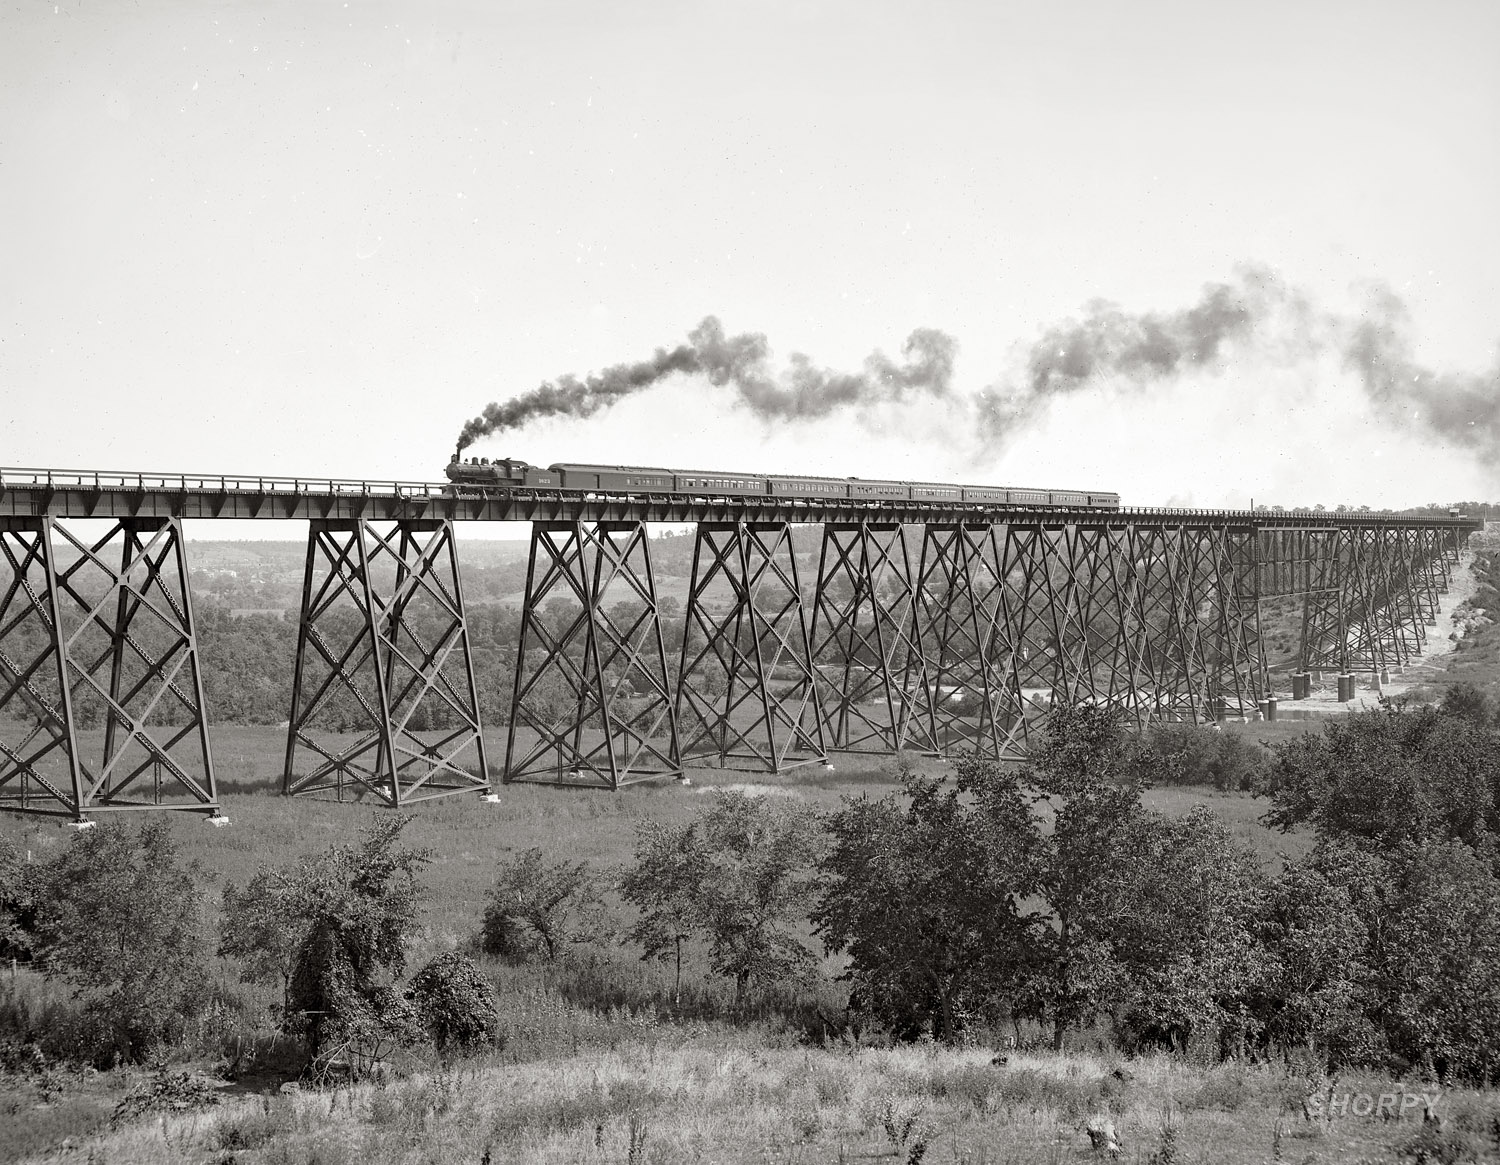 "Chicago & North Western viaduct over Des Moines River near Boone, Iowa" ca. 1902. Photo by William Henry Jackson. Detroit Publishing Co. View full size.